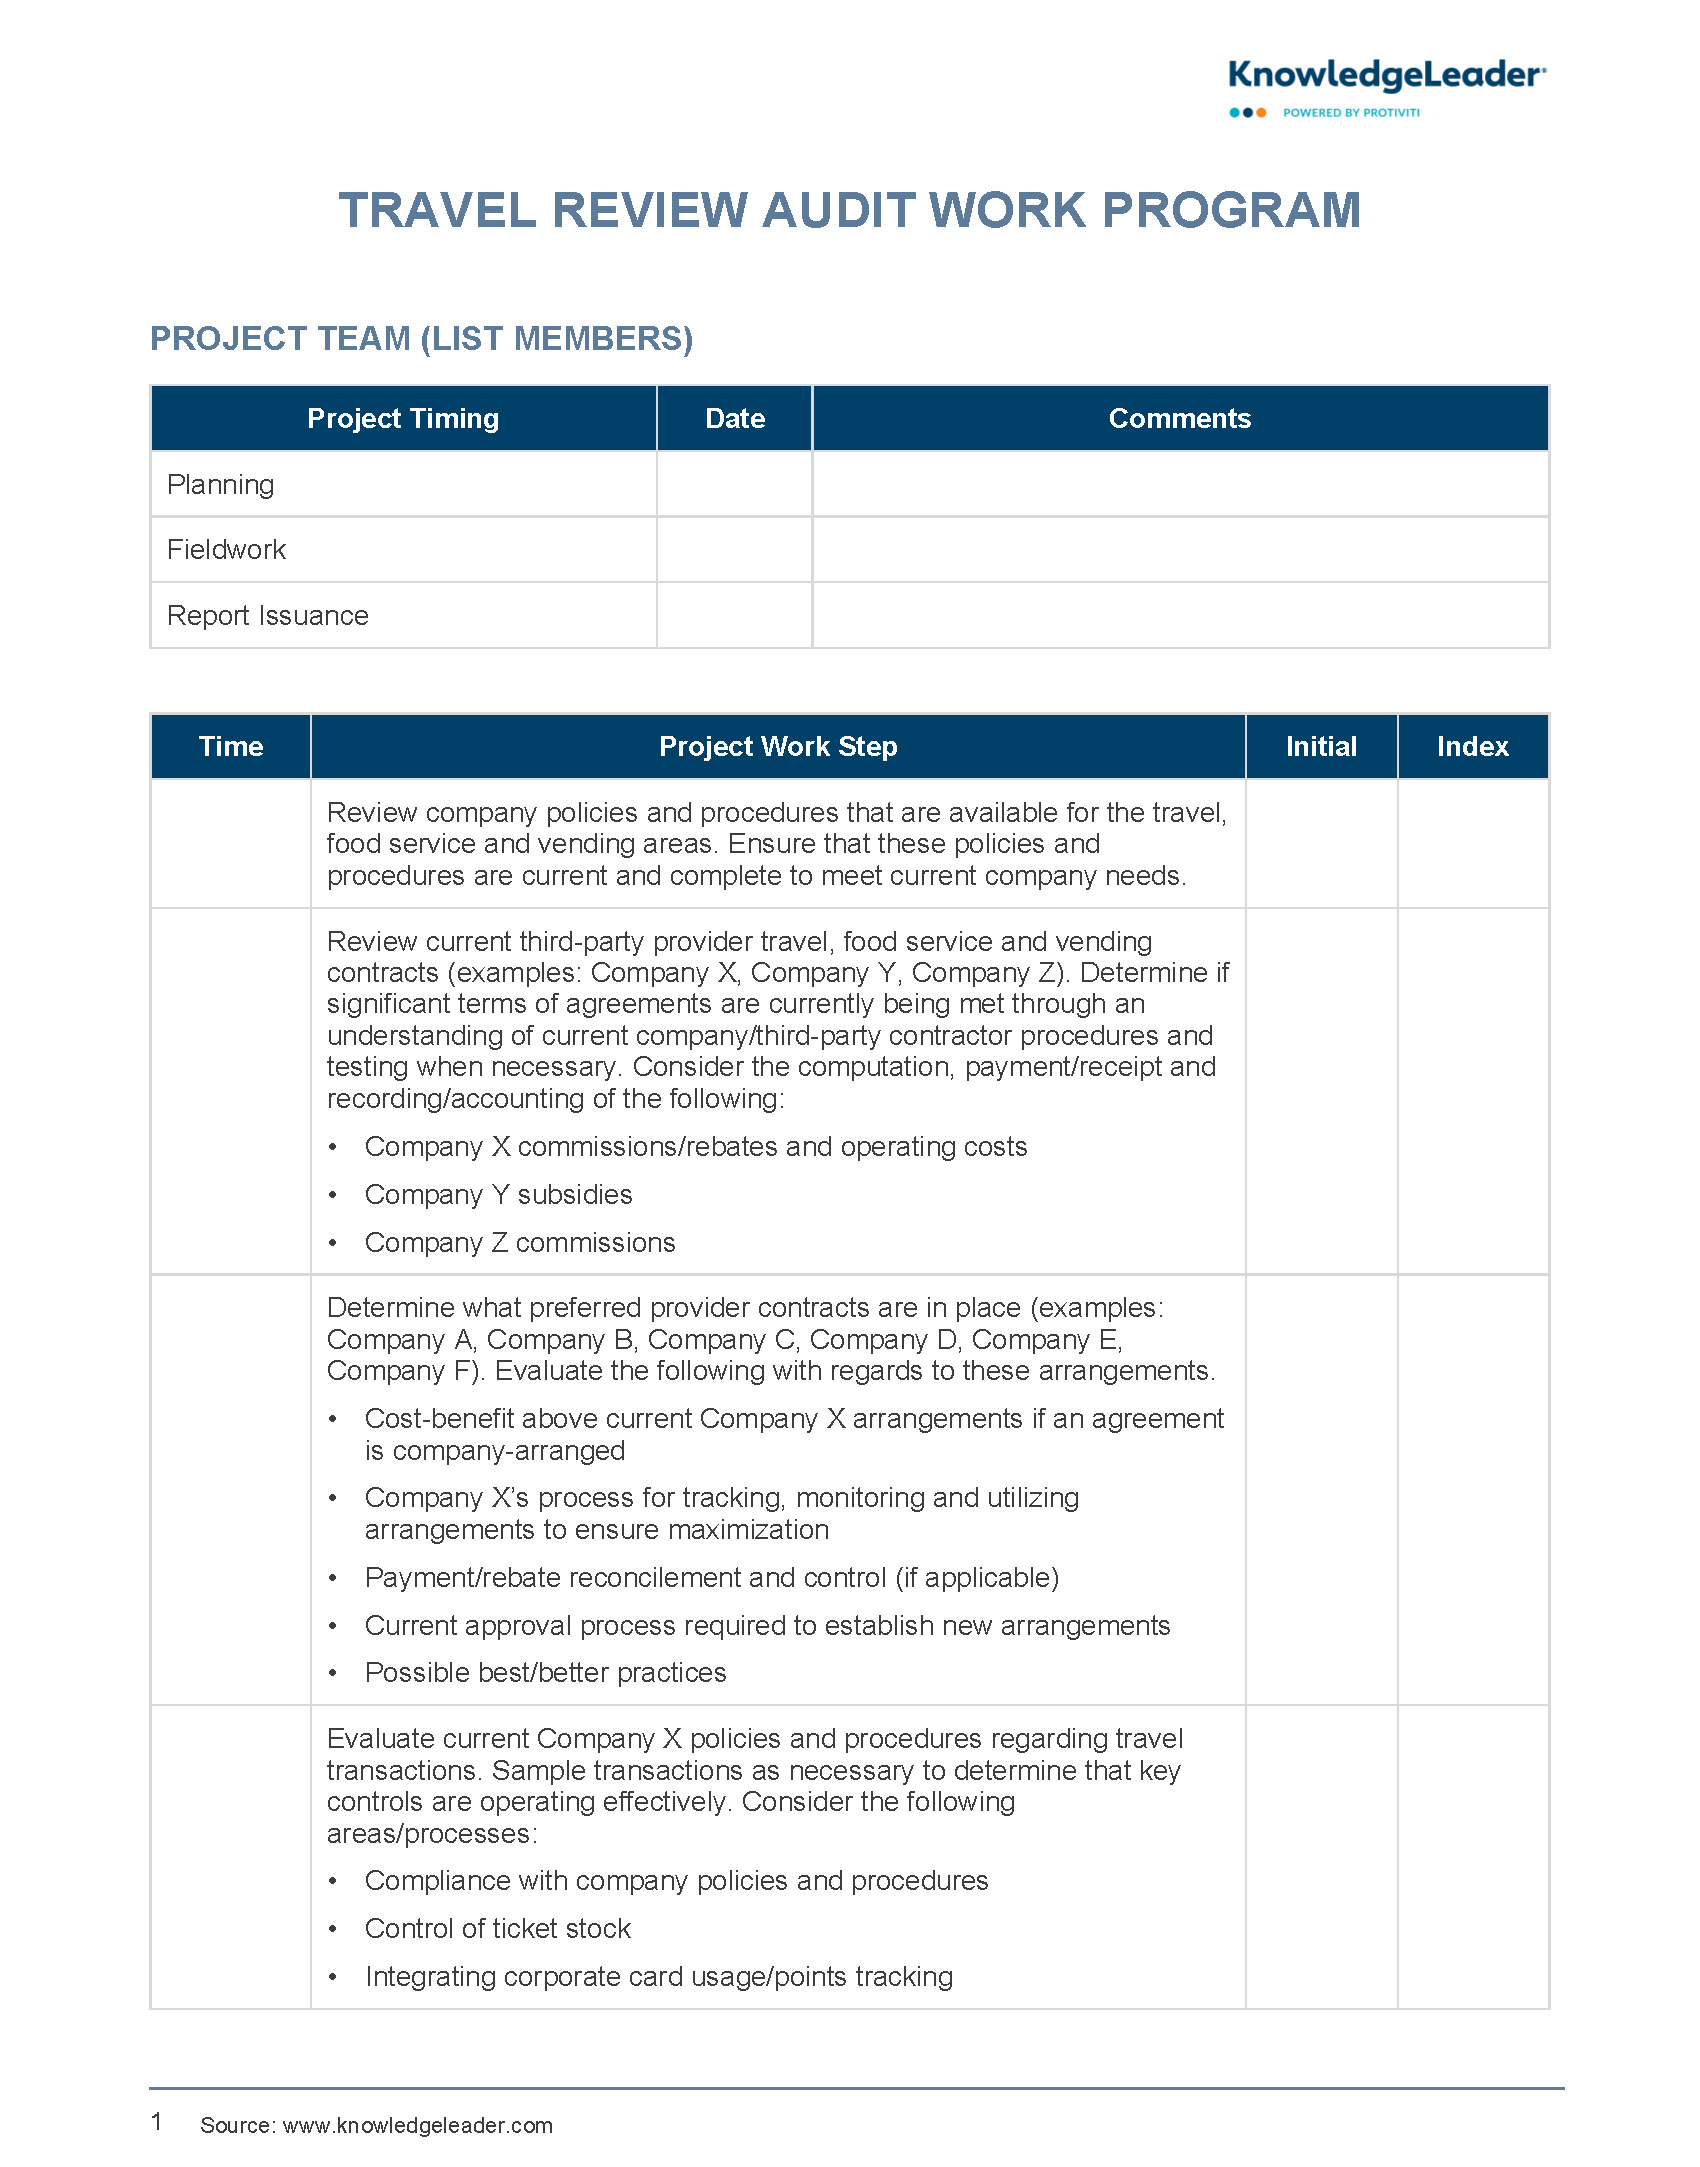 Screenshot of the first page of Travel Review Audit Work Program